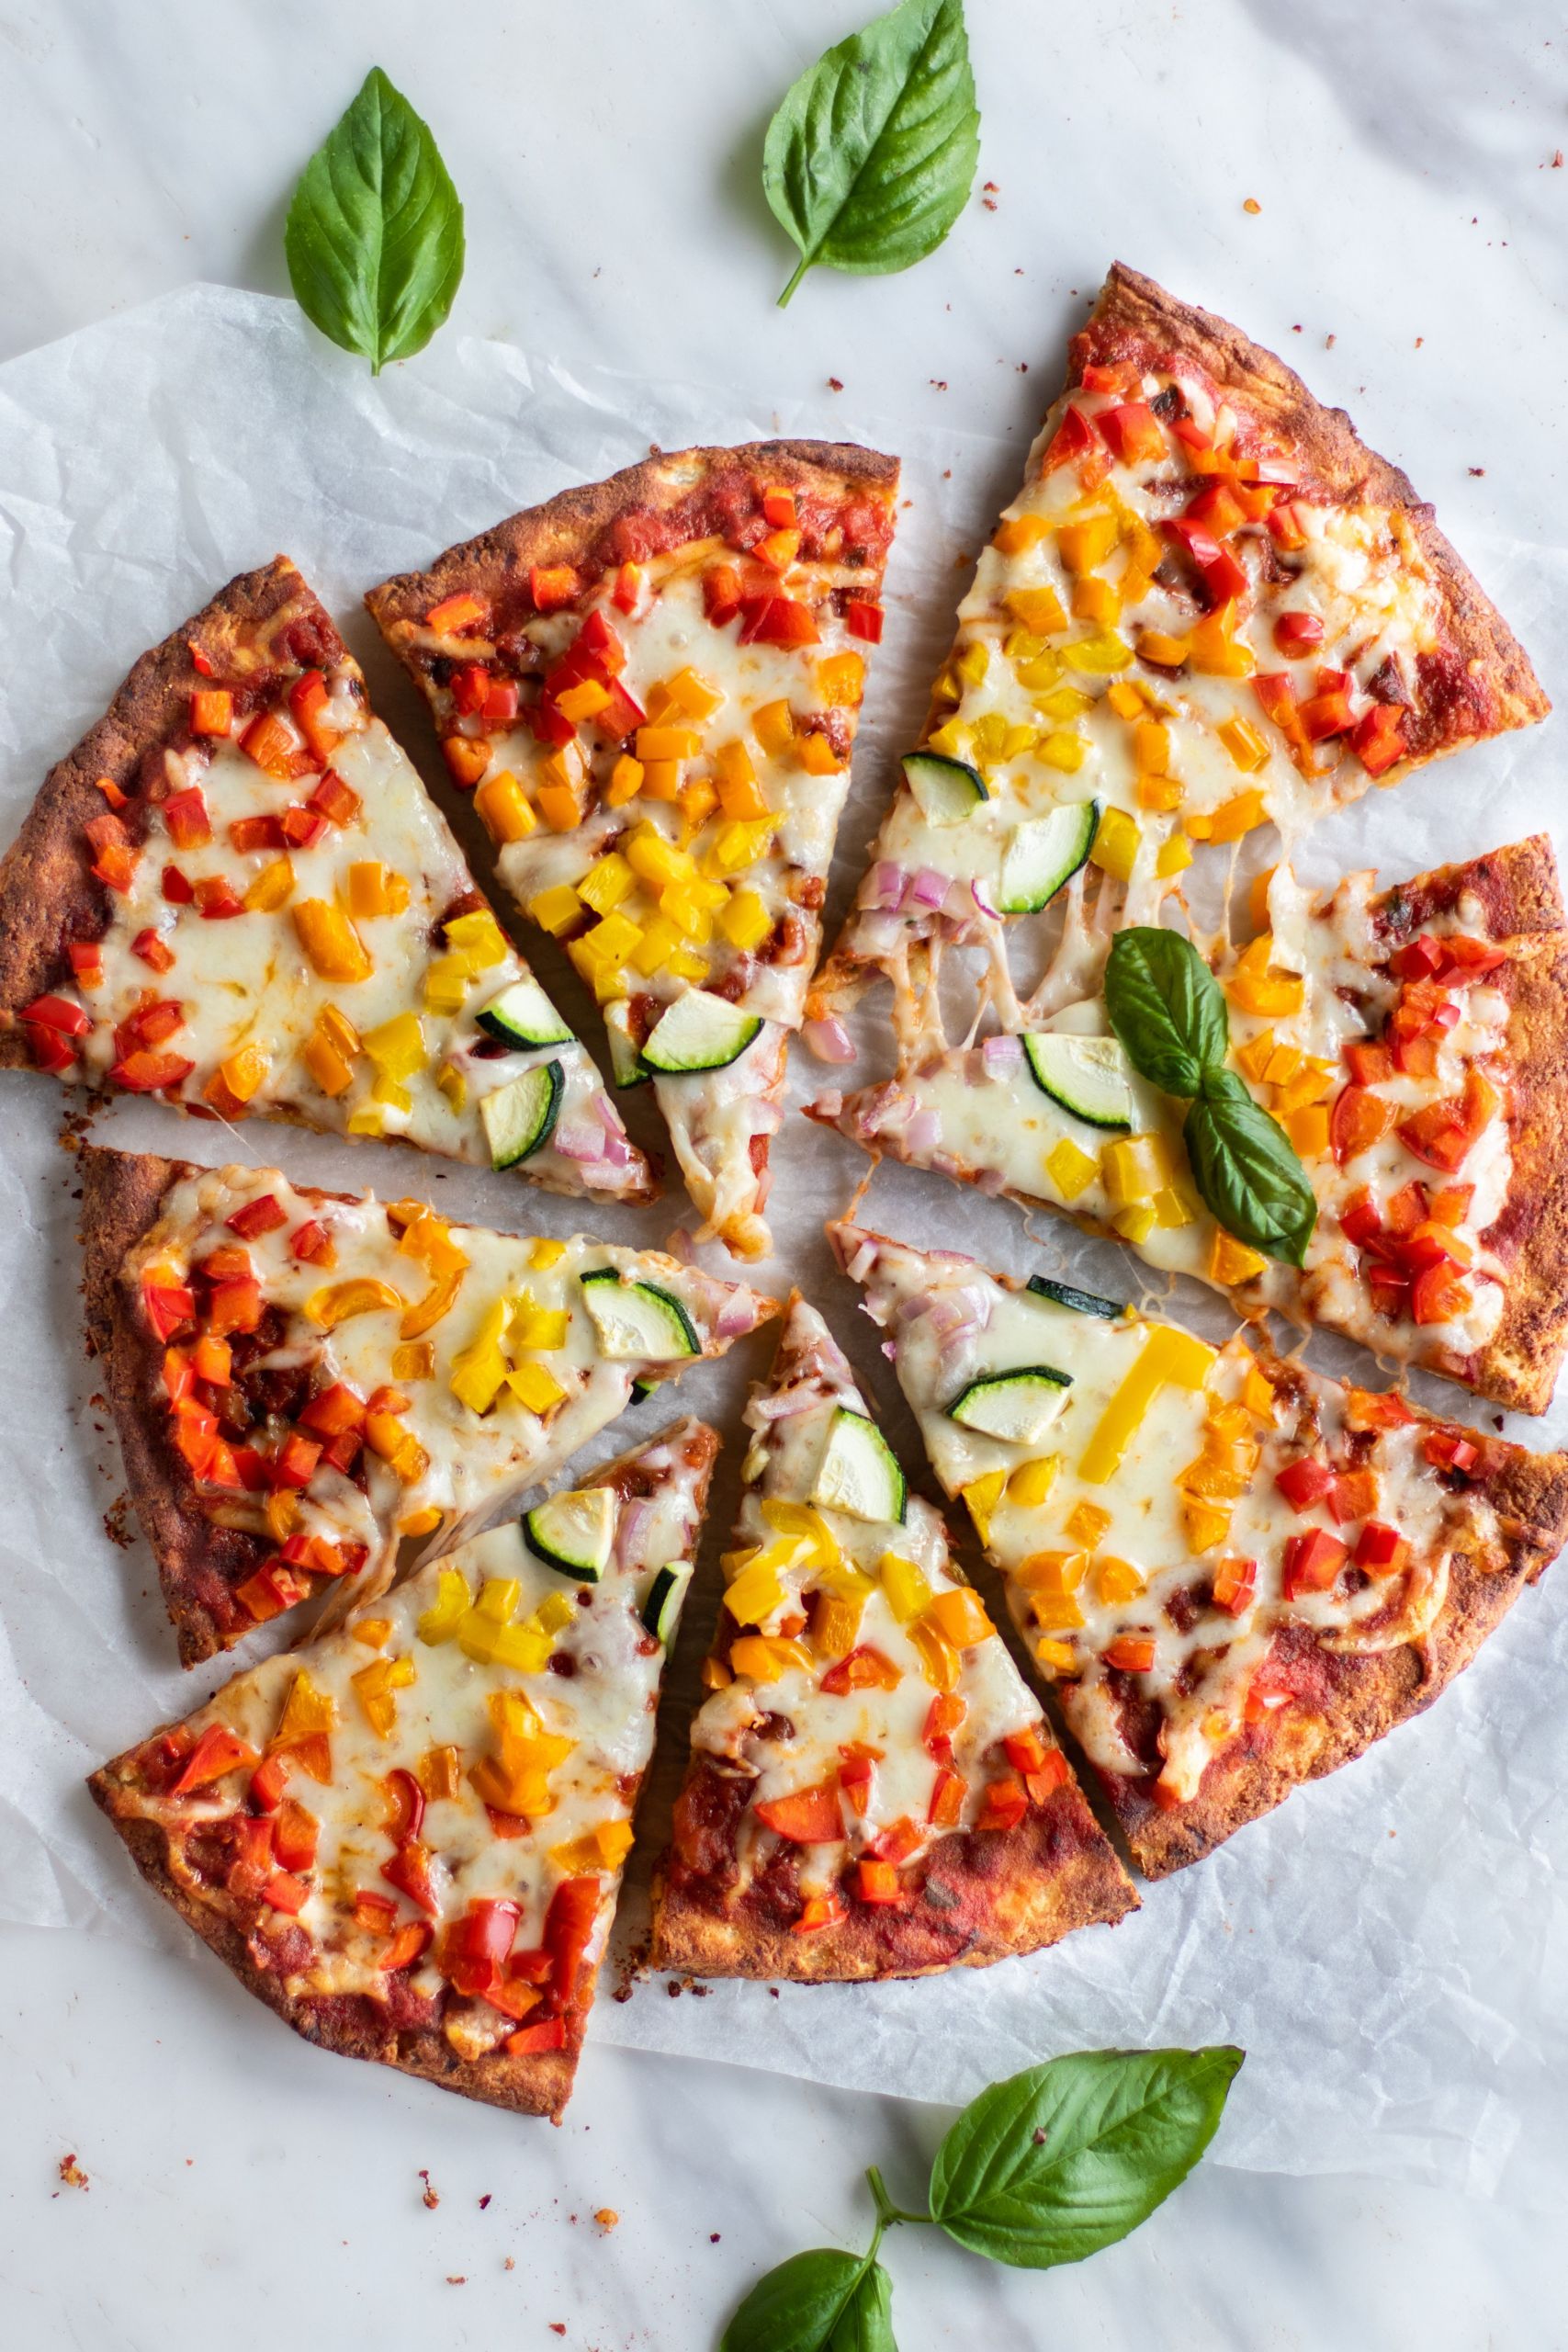 Gluten Free Pizza Dough Whole Foods
 A mindful pizza crust that has a very similar flavor and